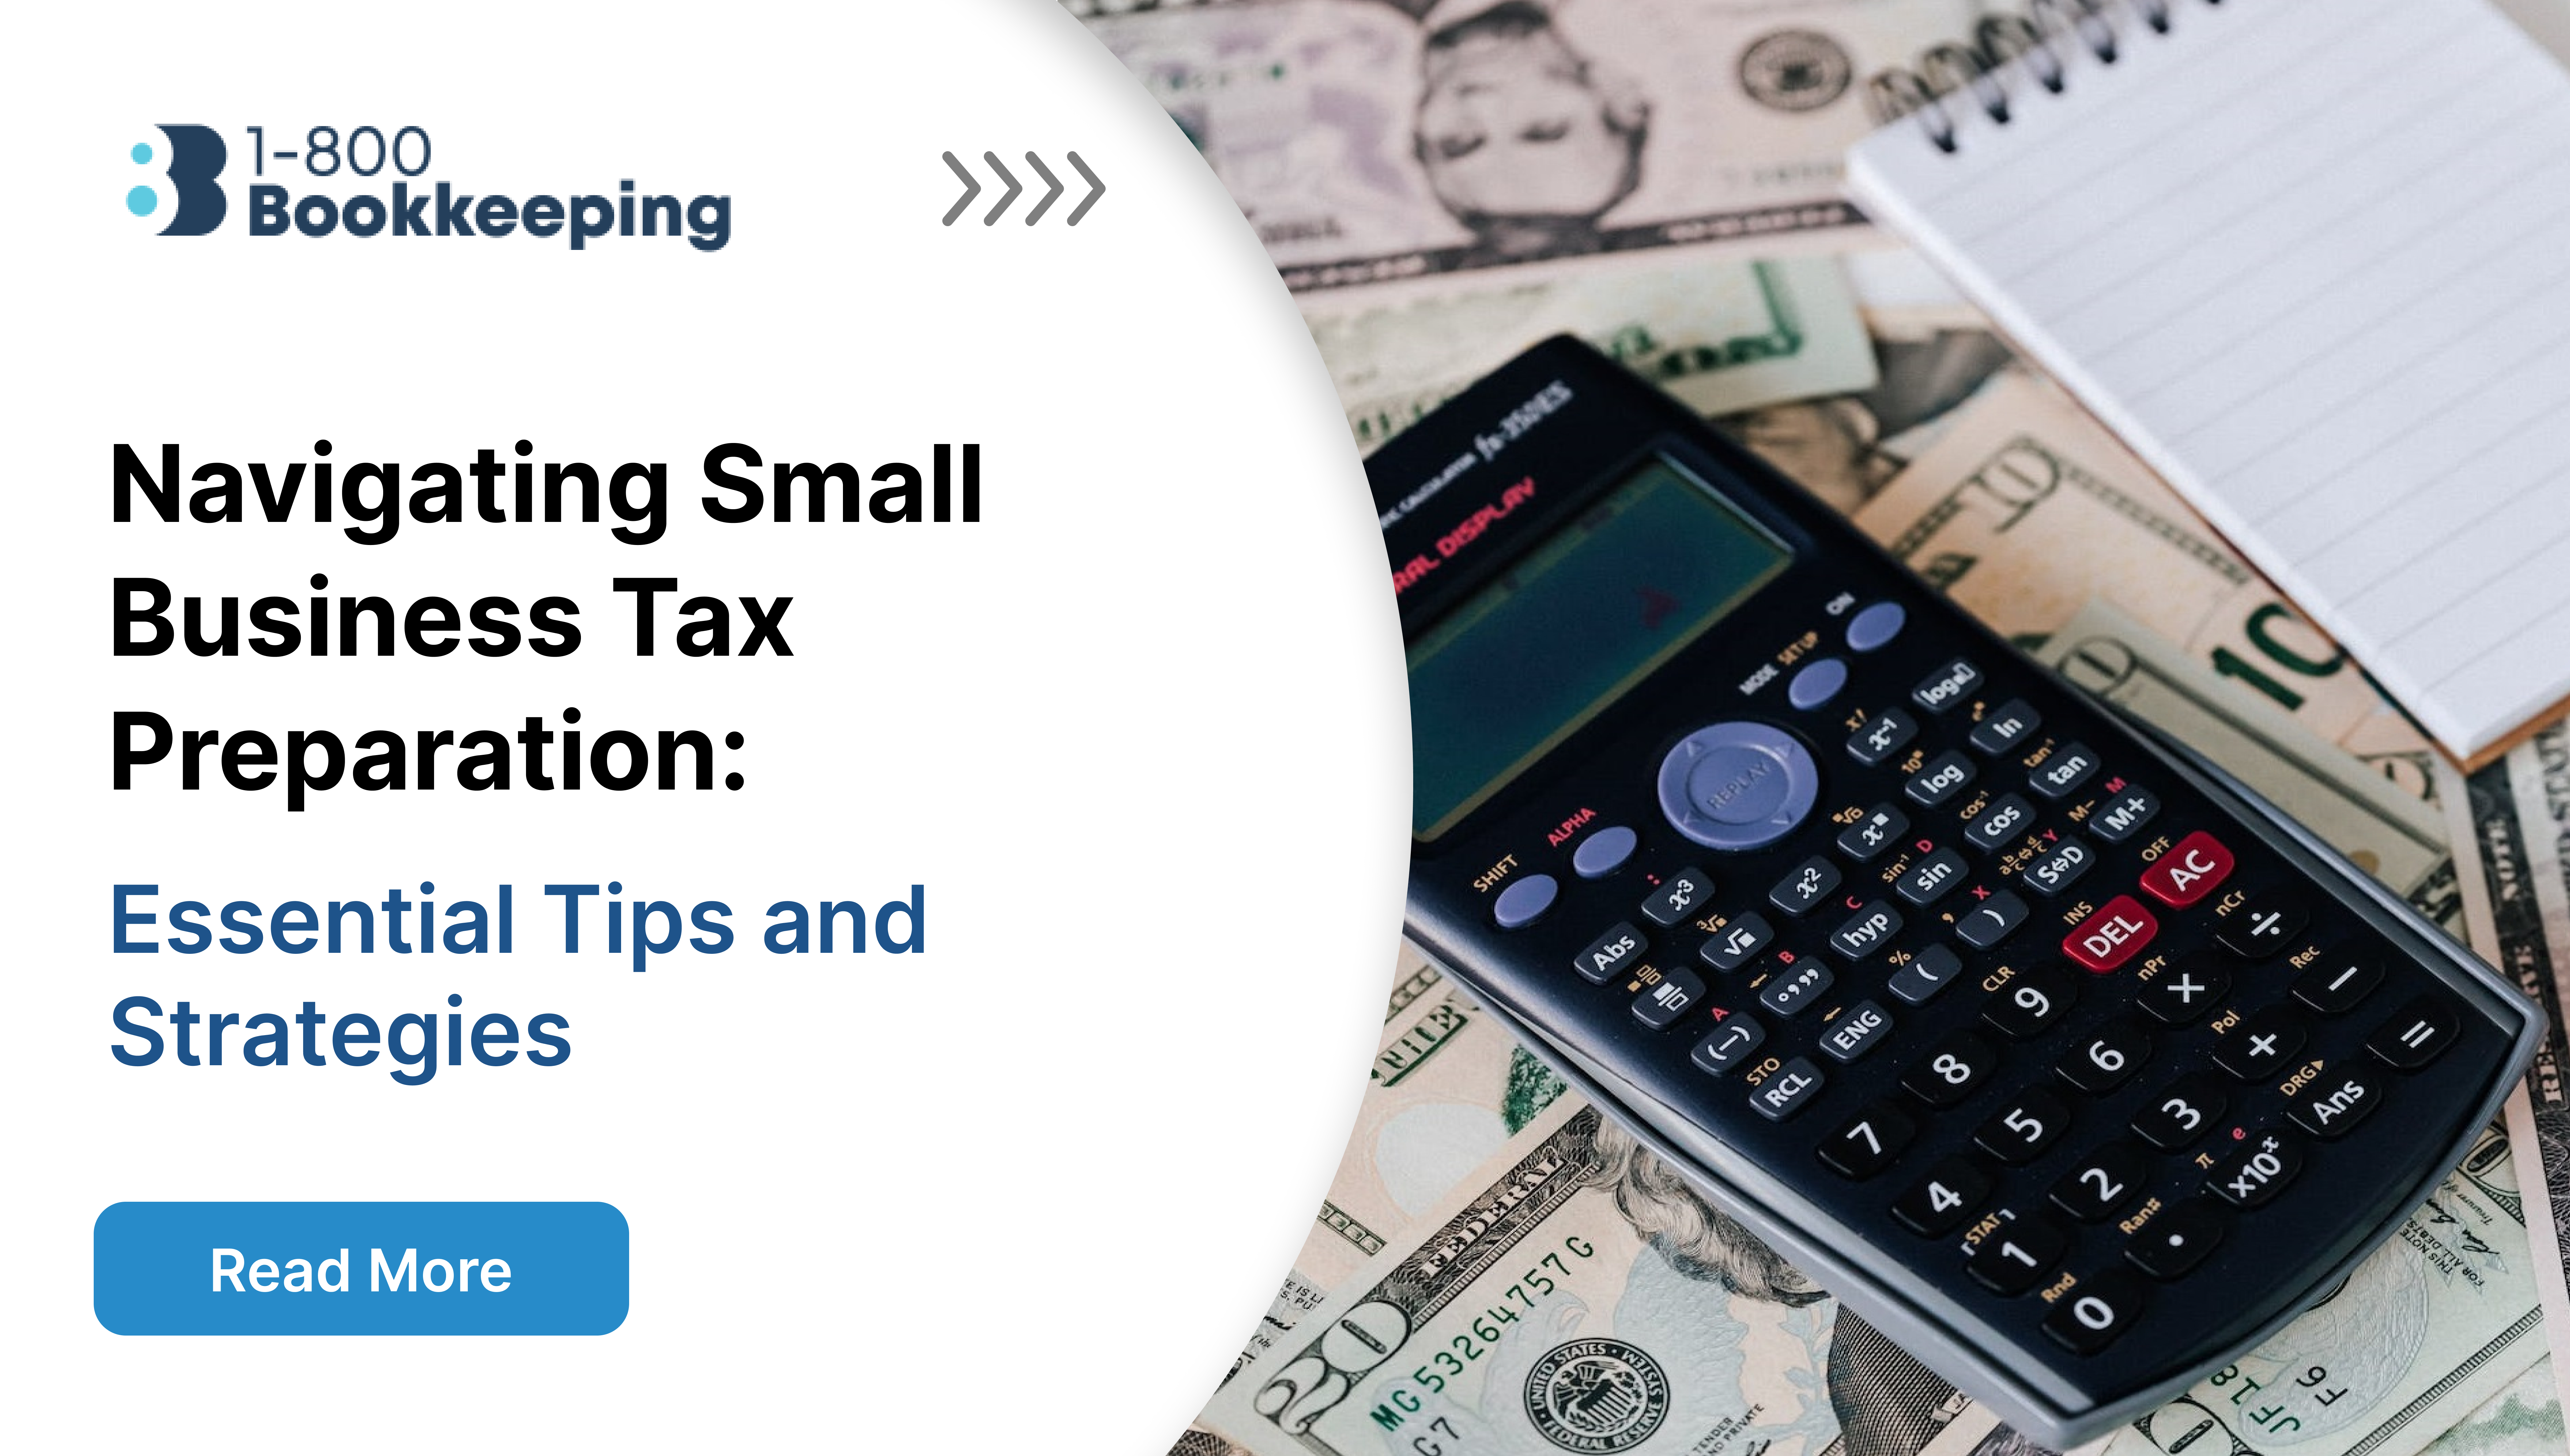 Navigating Small Business Tax Preparation: Essential Tips and Strategies